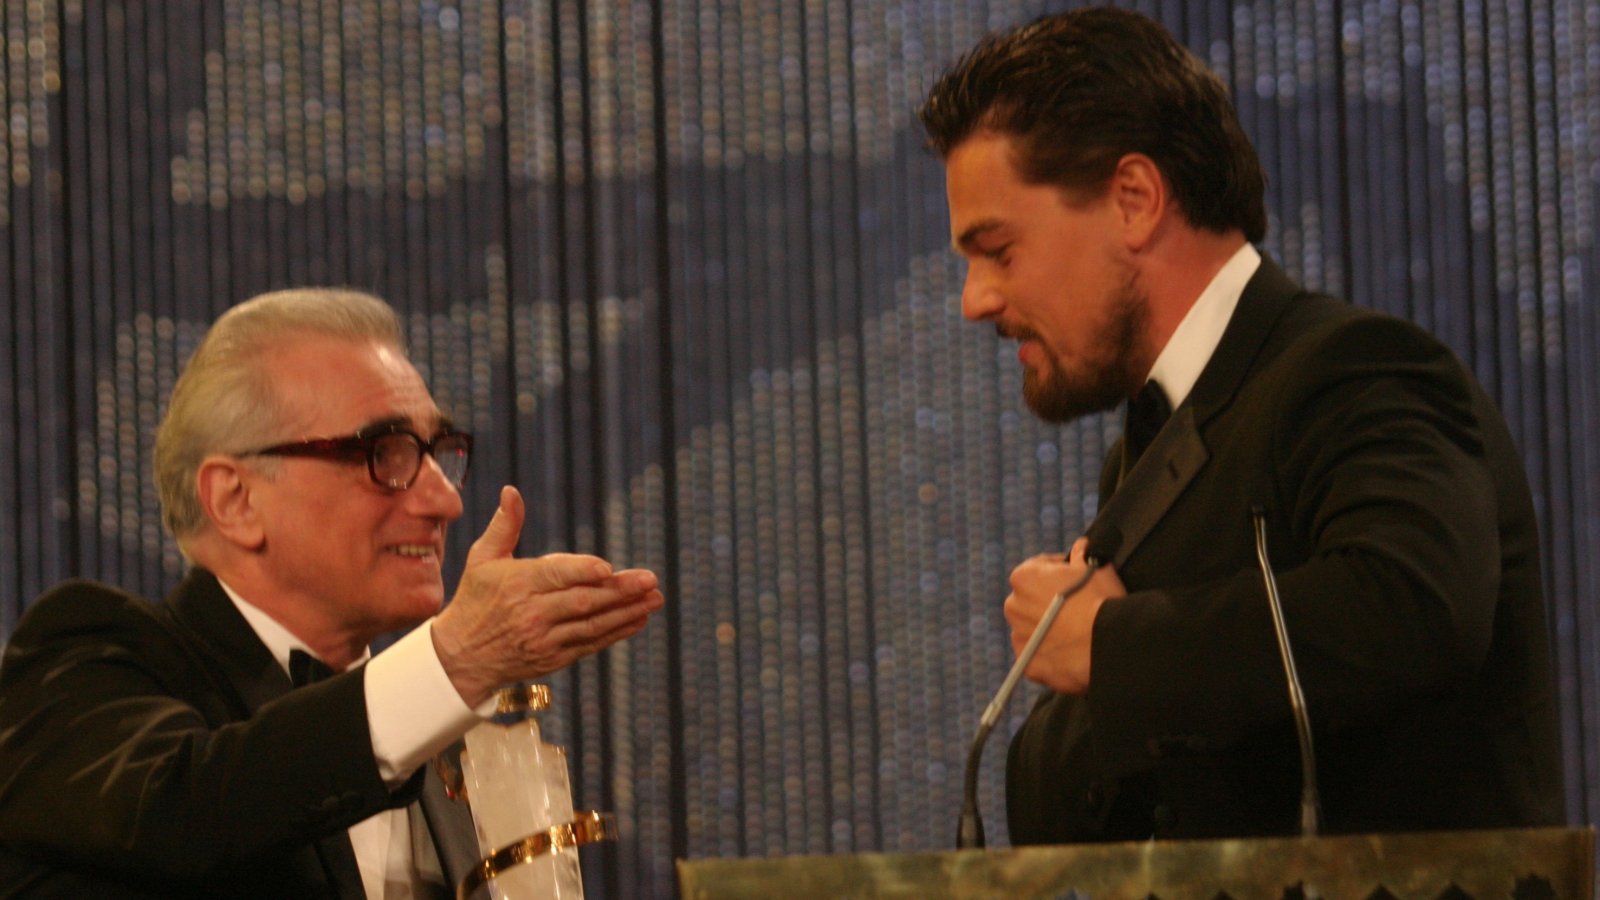 Martin Scorsese: Revealed the title and plot of his next film, again with Leonardo DiCaprio